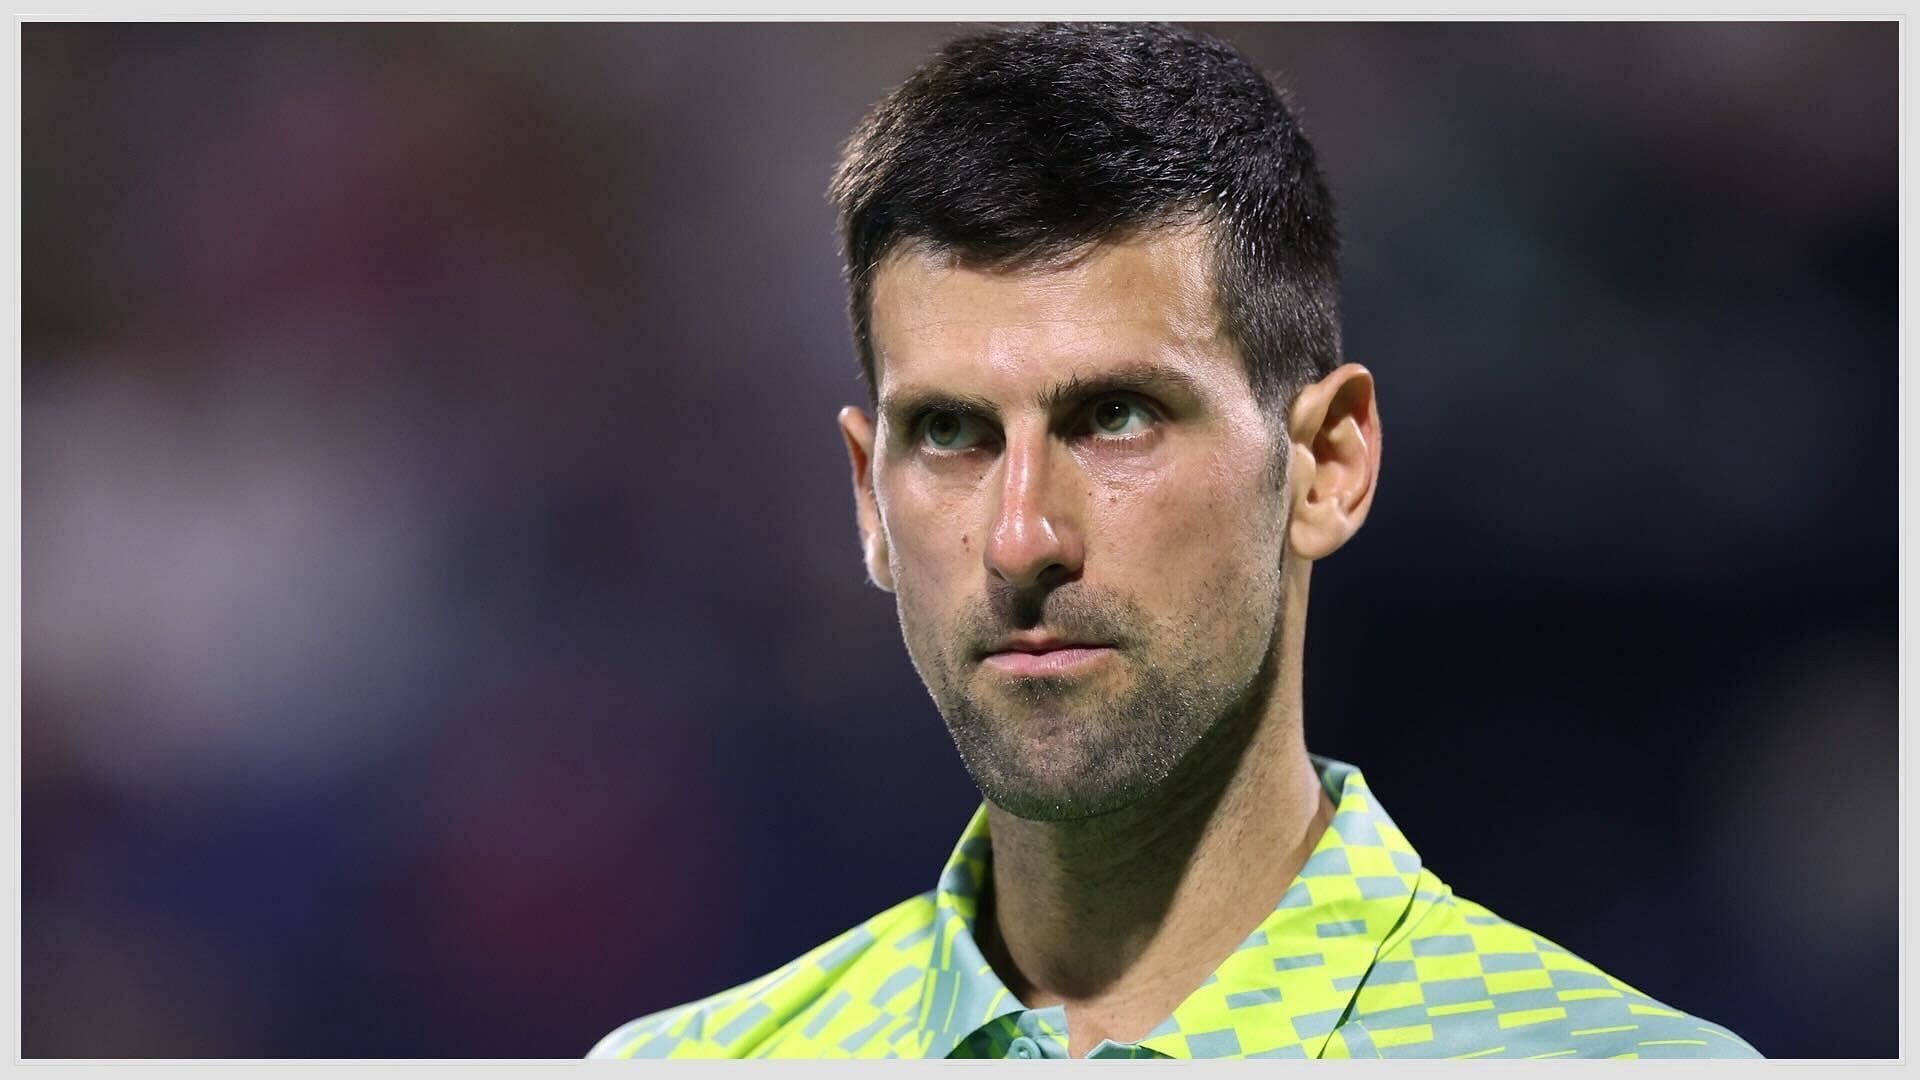 Novak Djokovic stared down his opponent after being hit on the calf